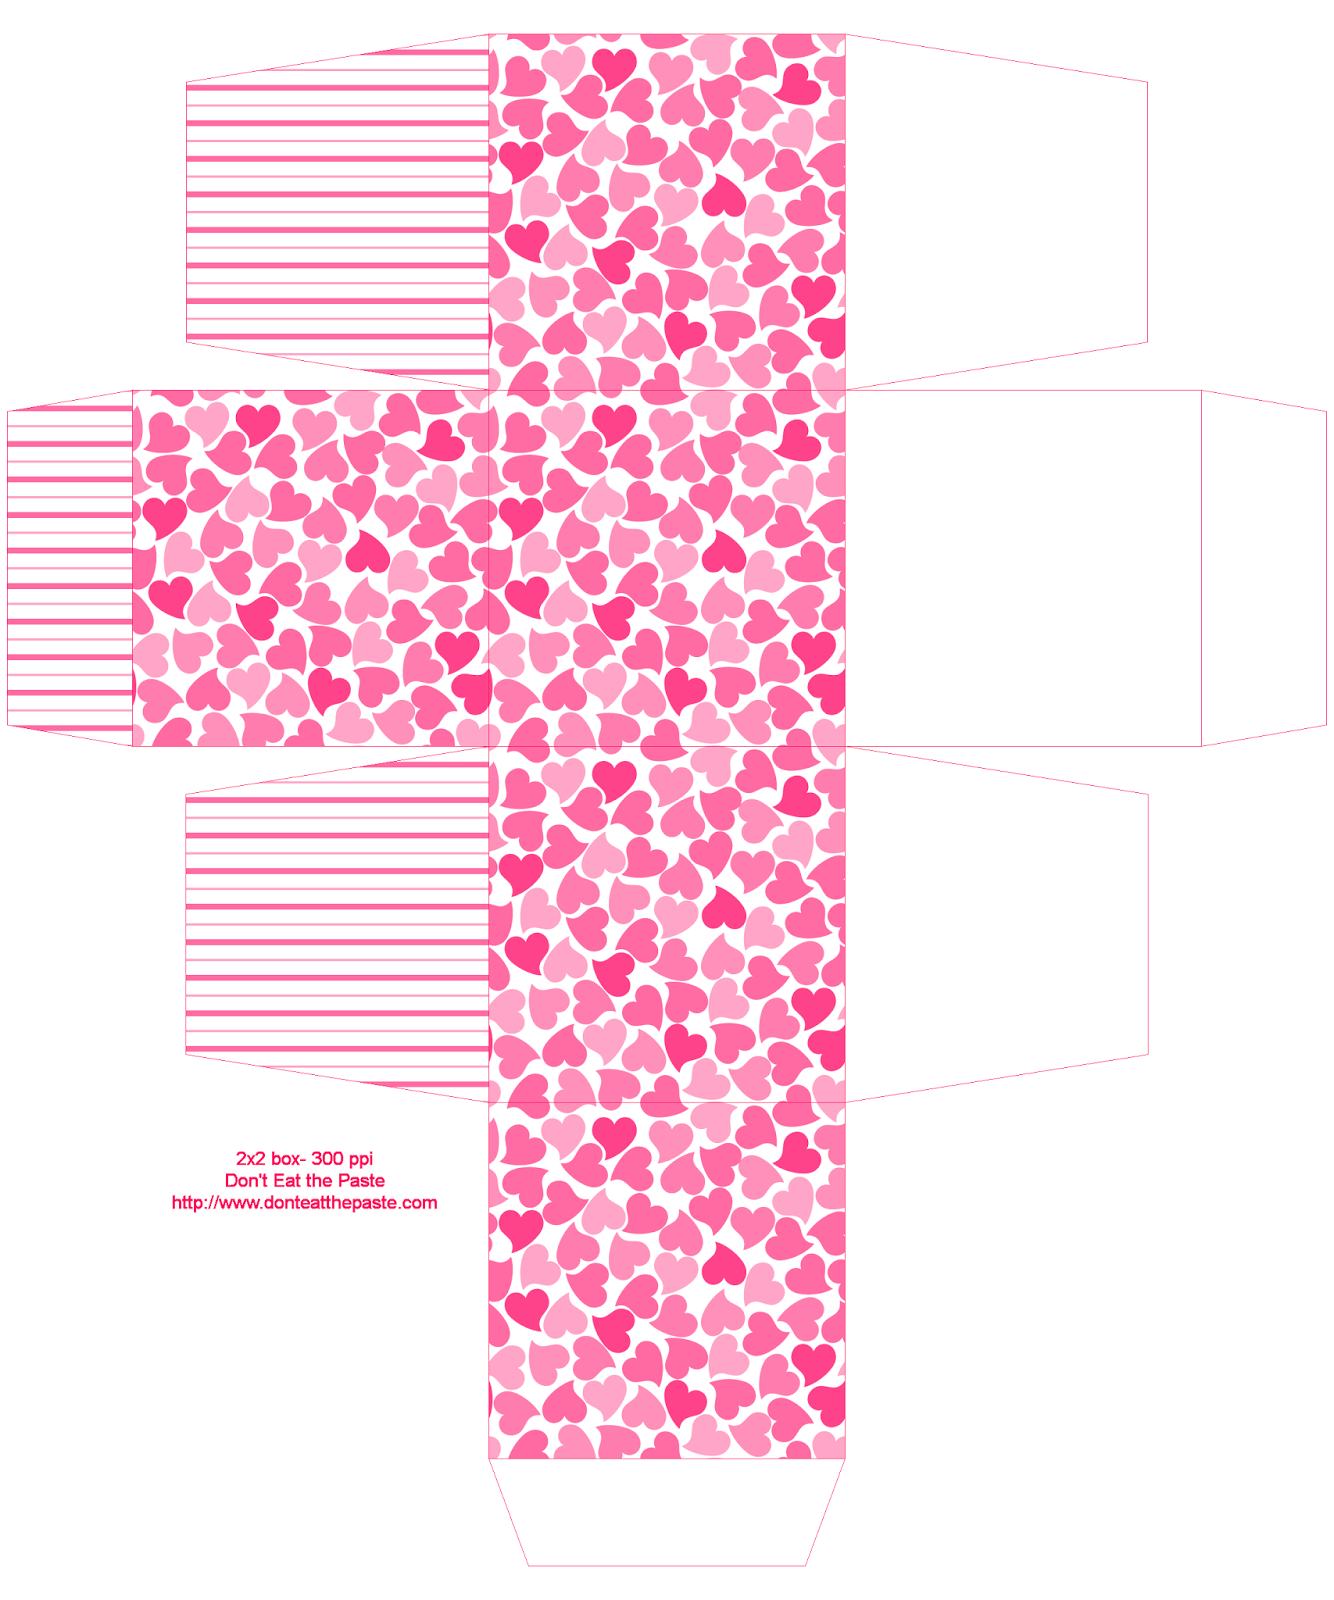 Printable hearts box - 2 sizes available (cube) #papercrafts #printables #giftbox